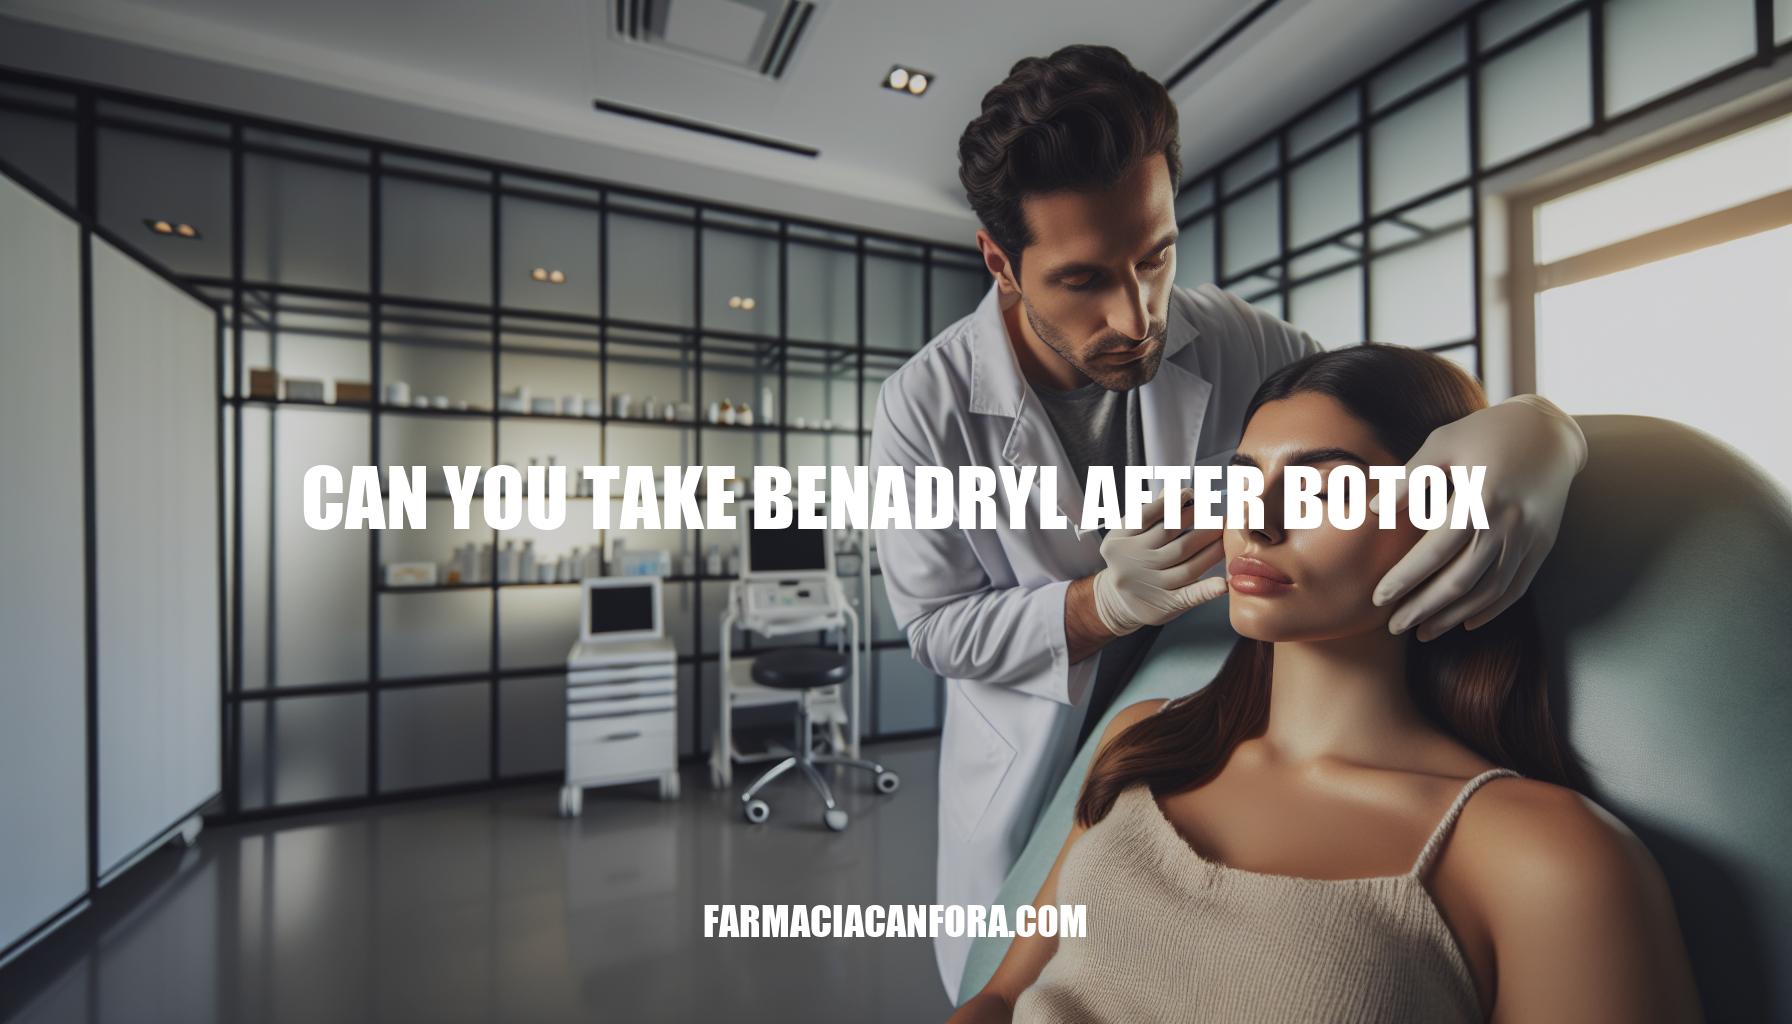 Can You Take Benadryl After Botox: Important Considerations